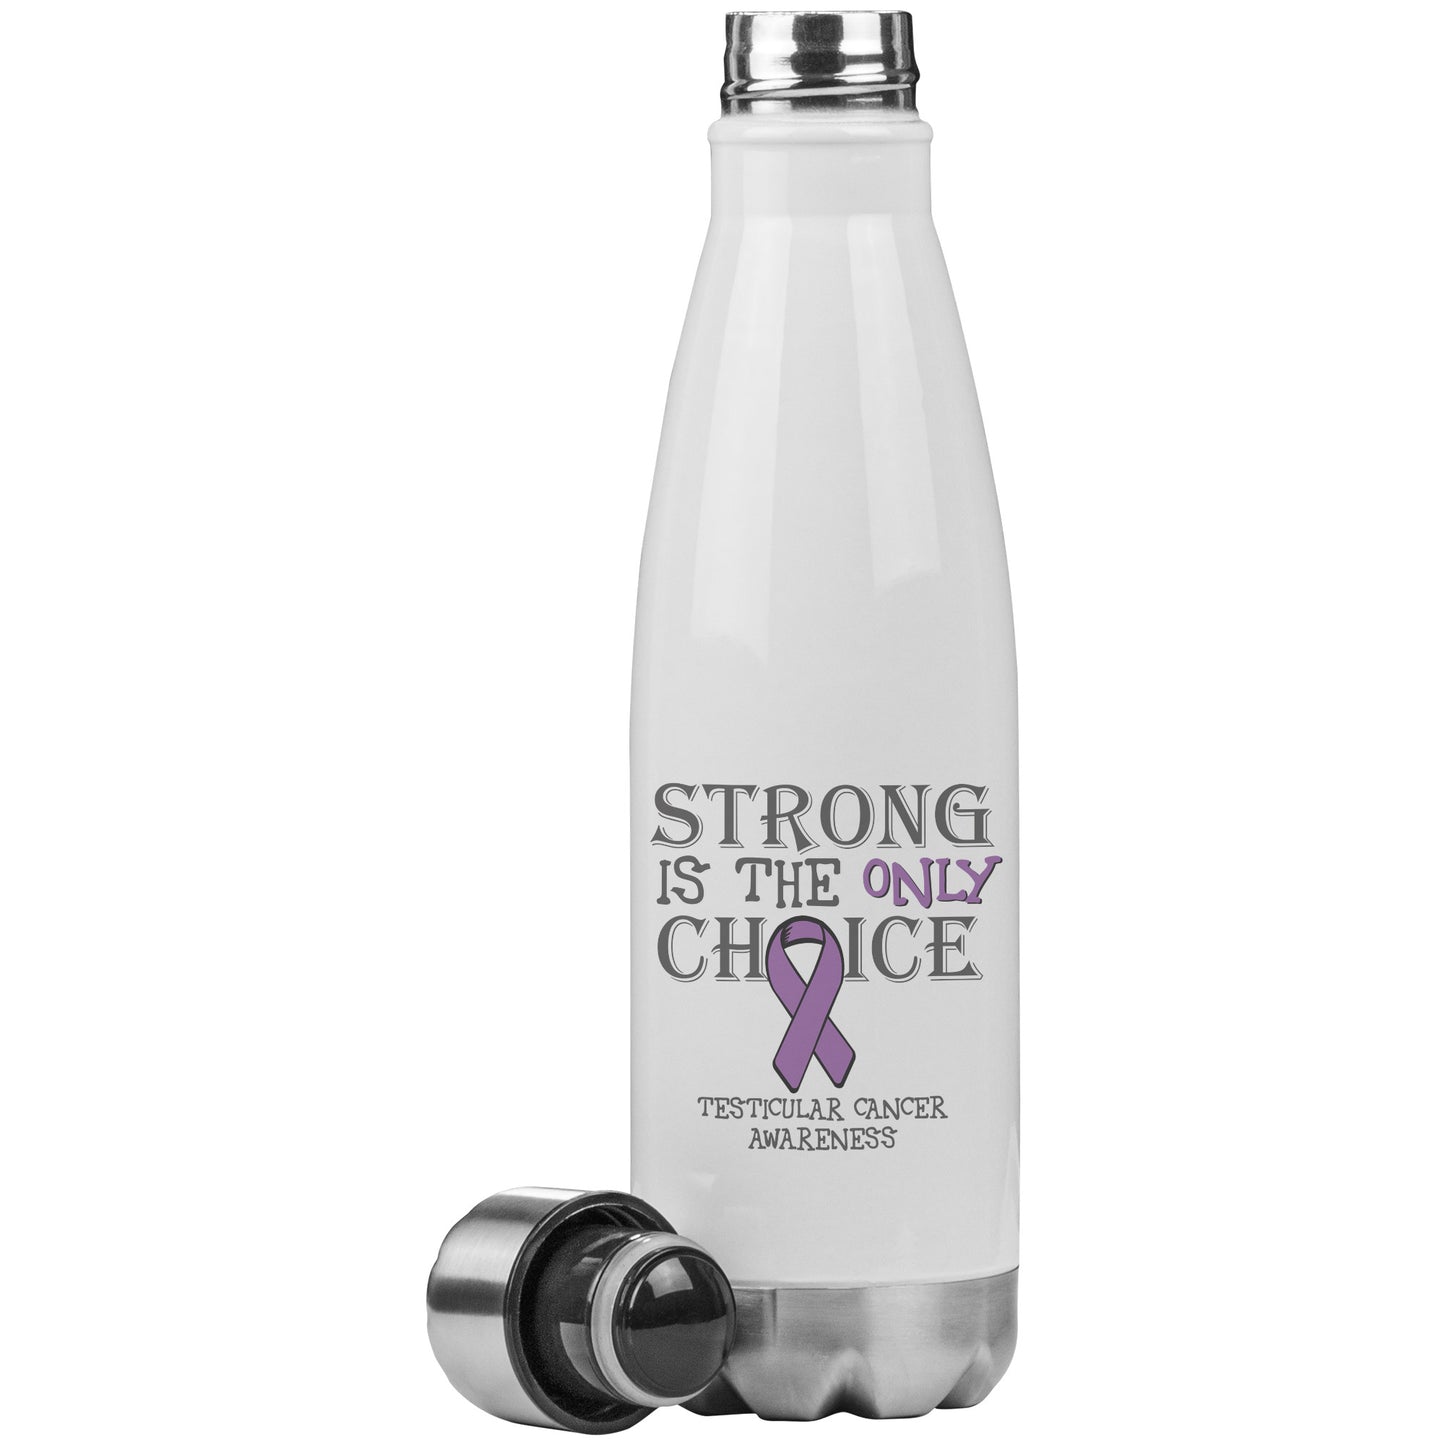 Strong is the Only Choice -Testicular Cancer Awareness 20oz Insulated Water Bottle